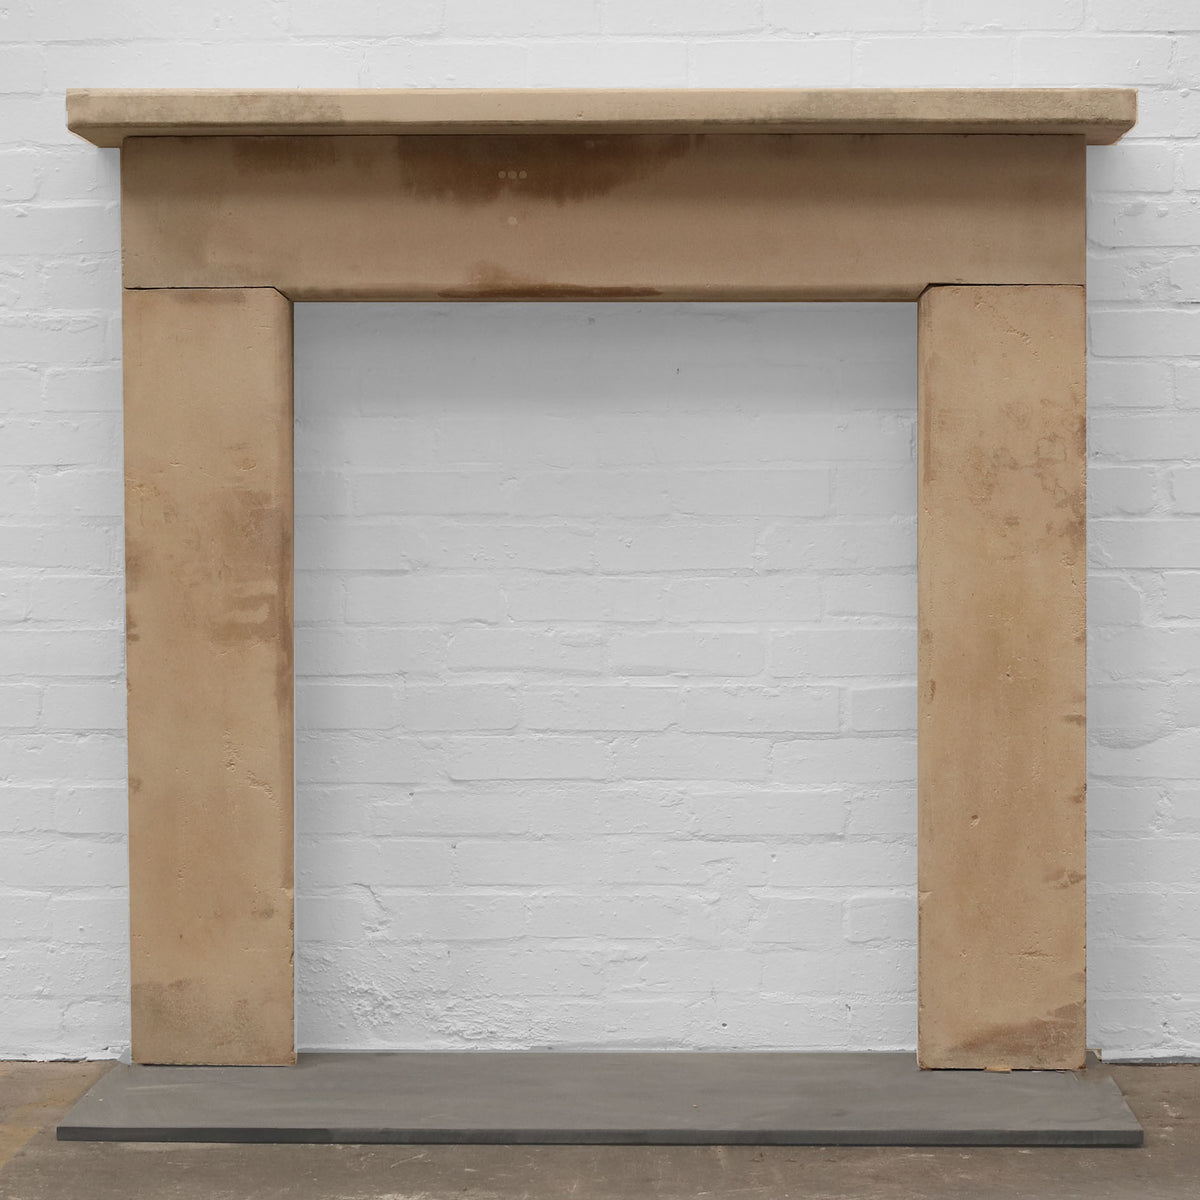 Antique Late 18th Century Limestone Fireplace Surround | The Architectural Forum